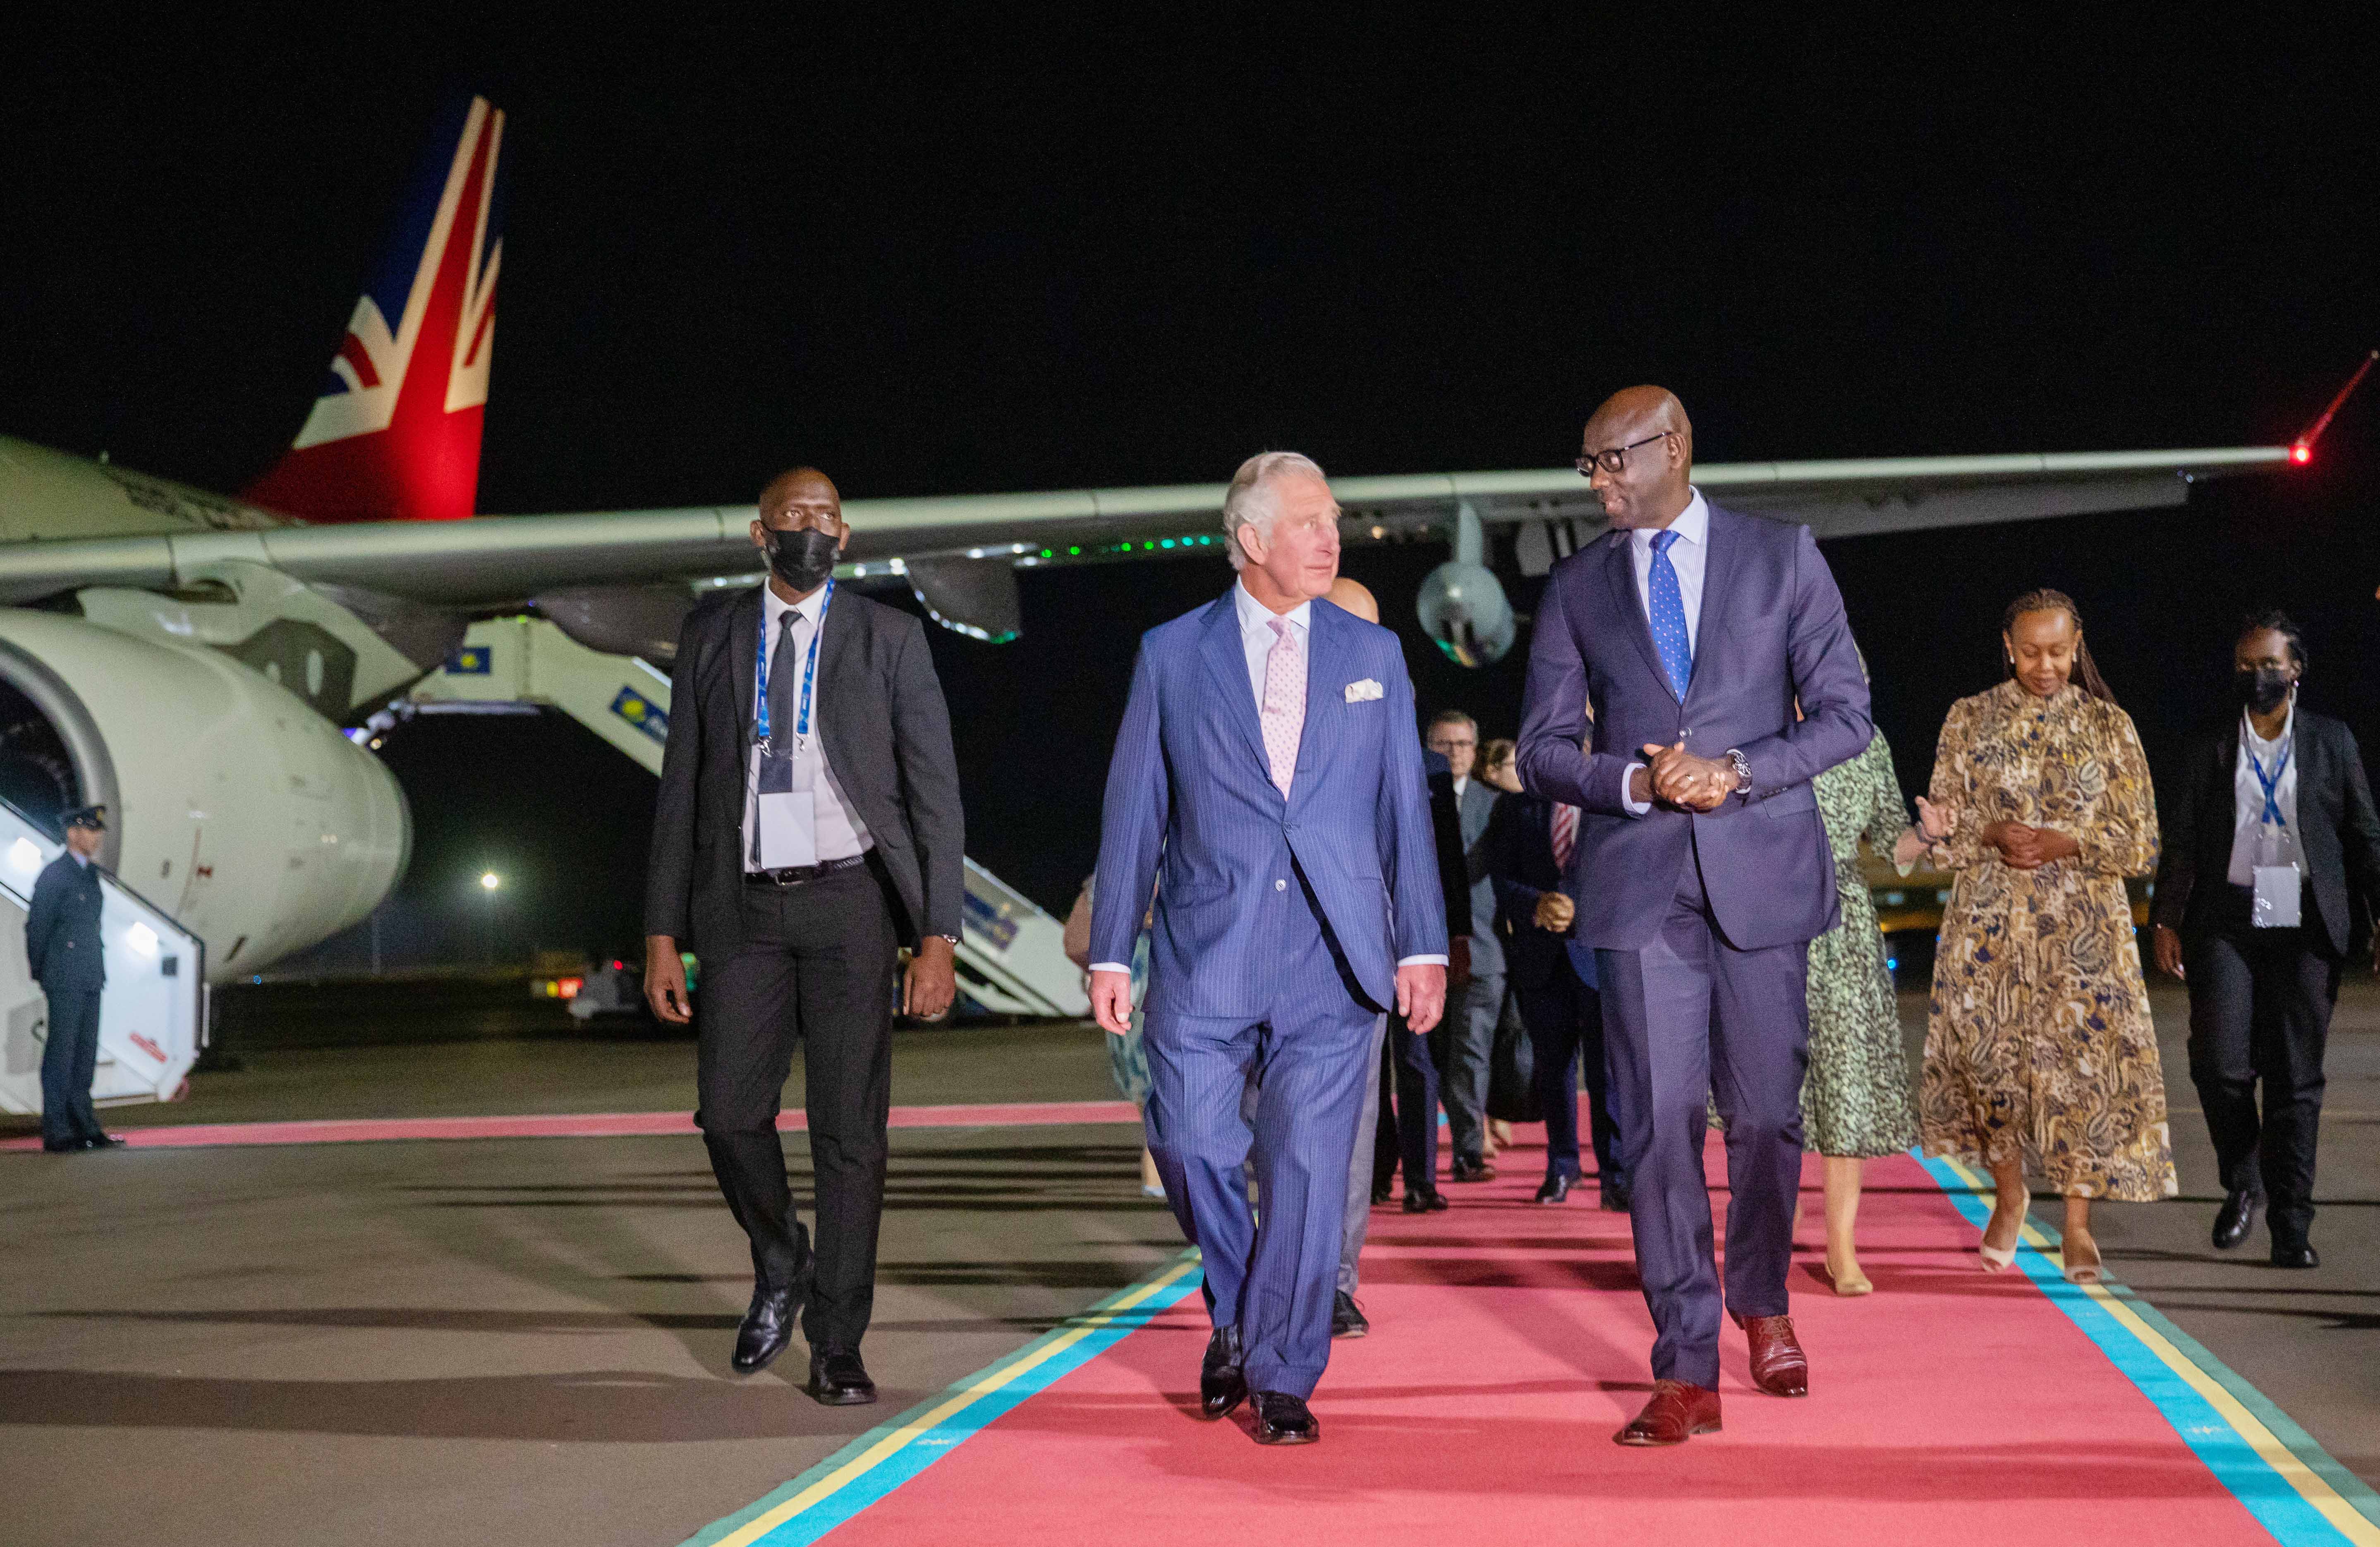 His Royal Highness Prince Charles  and Camilla, the Duchess of Cornwall arrive at Kigali International Airport for the Commonwealth Heads of Government Meeting   on Tuesday June 21,2022  .Photo by Olivier Mugwiza